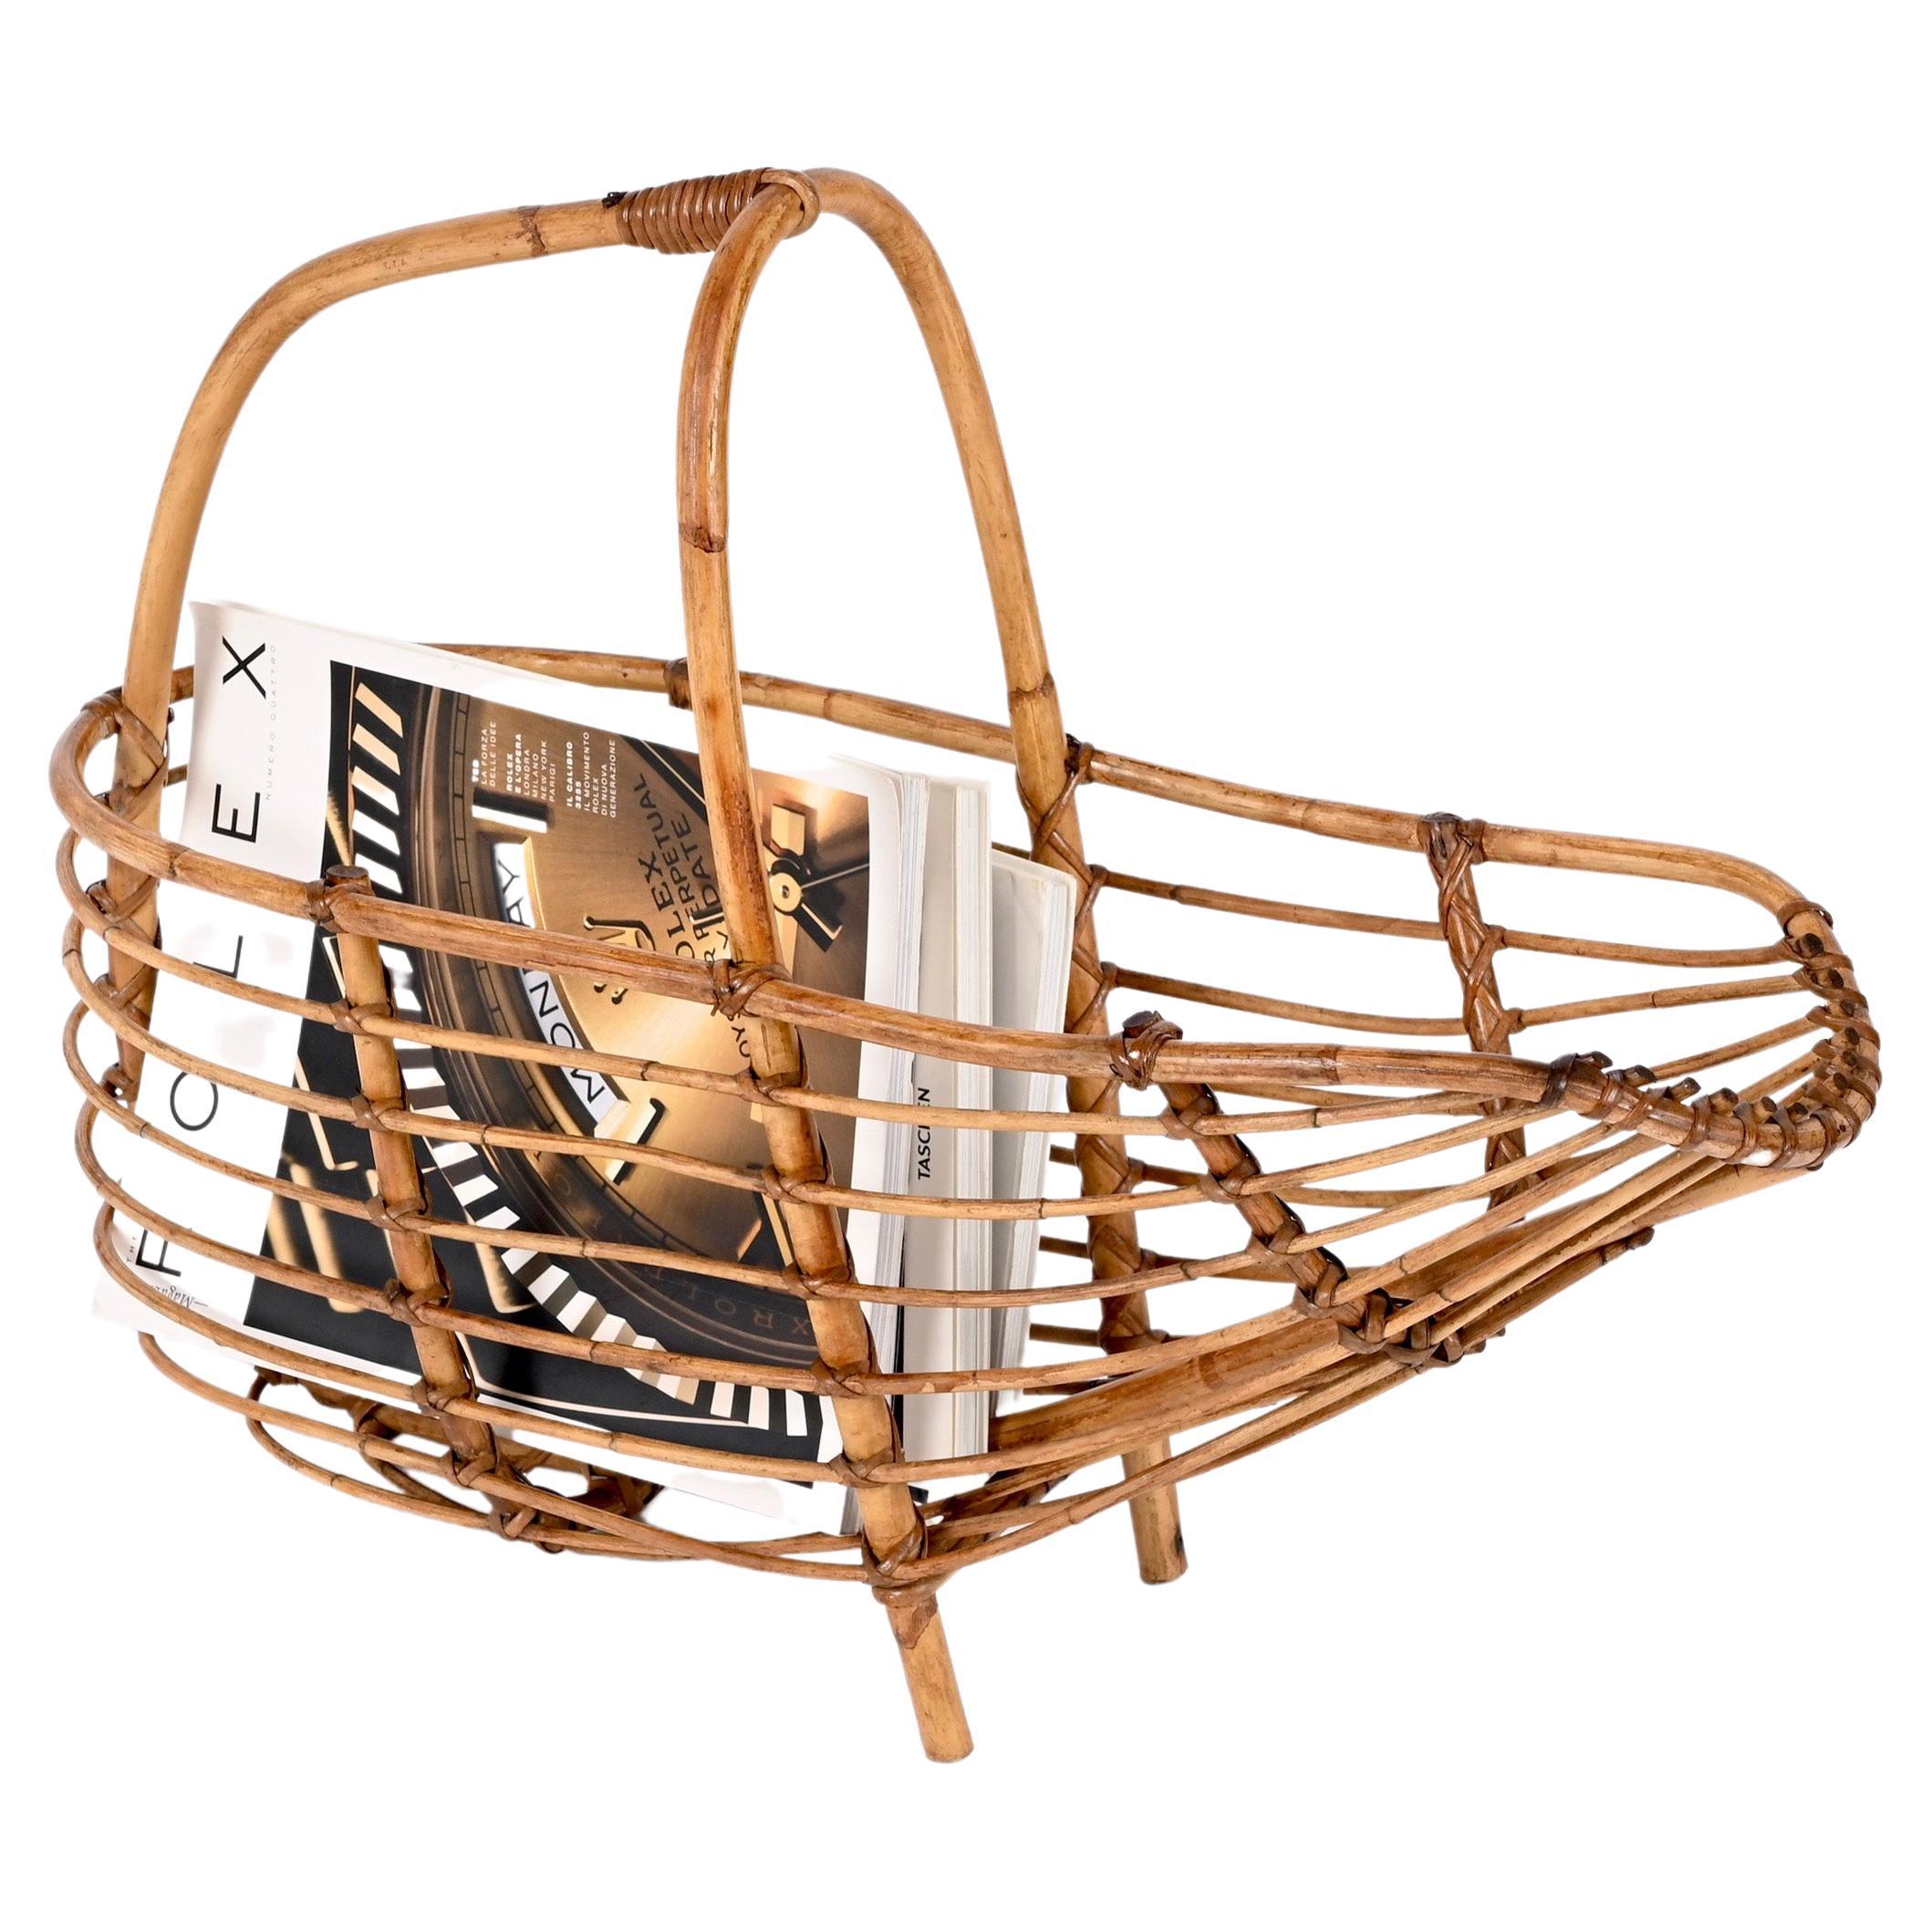 Amazing midcentury French riviera nest-shaped bamboo and rattan magazine rack. This wonderful piece was probably designed by Bonacina in Italy during 1960s.

This piece is fantastic as it is shaped like a nest with a bamboo handle on it with an